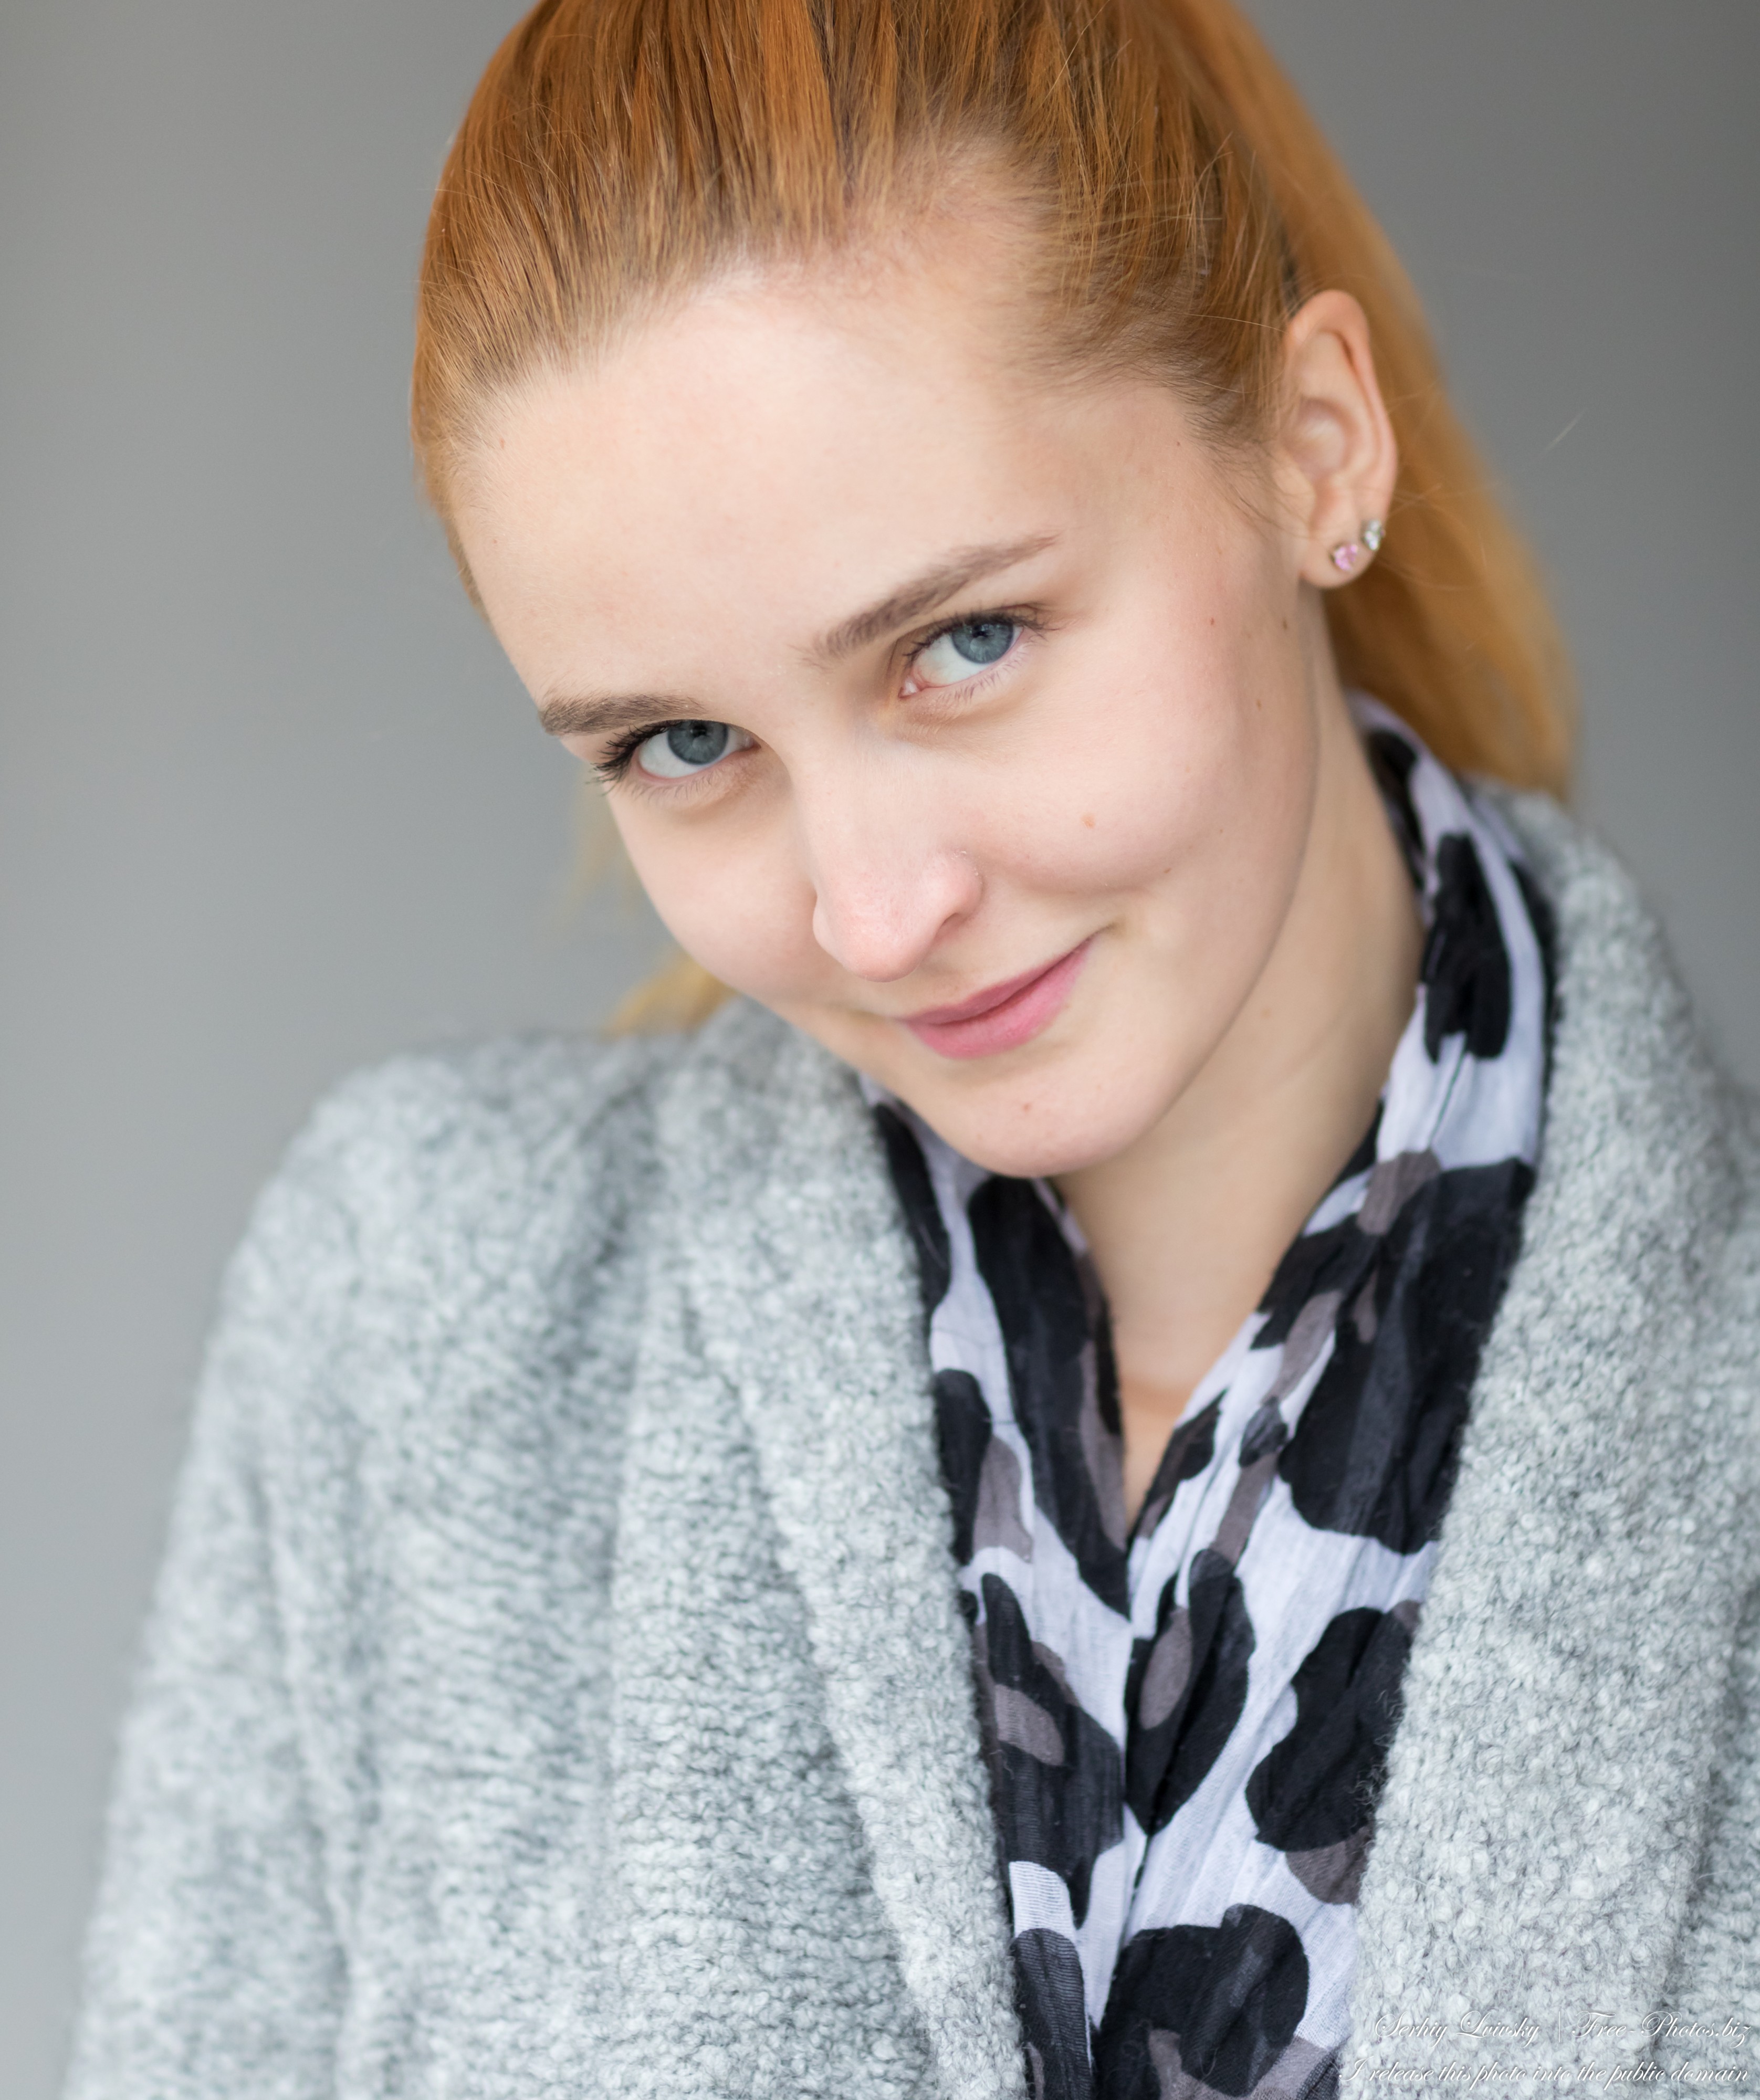 Ksenia - a 25-year-old girl with blue eyes and dyed hair photographed in November 2021 by Serhiy Lvivsky, portrait 2